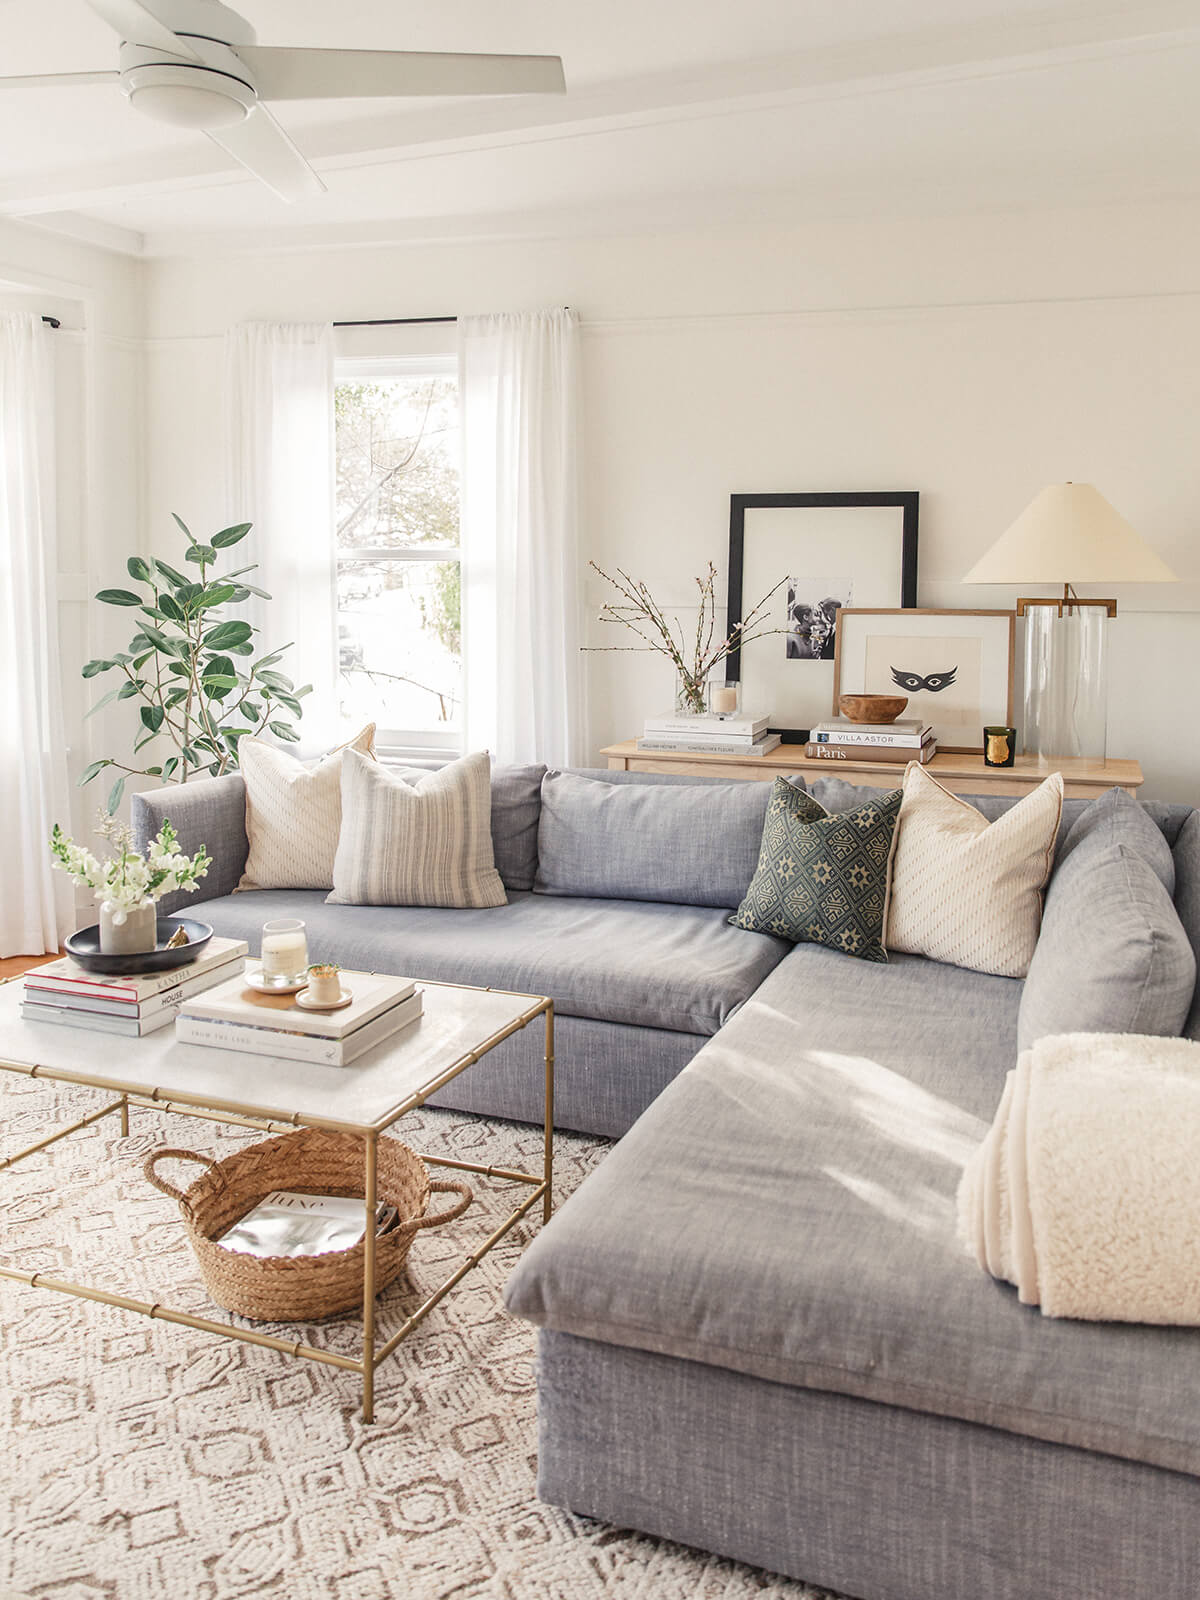 Creating a Warm Scandi Style Living Room